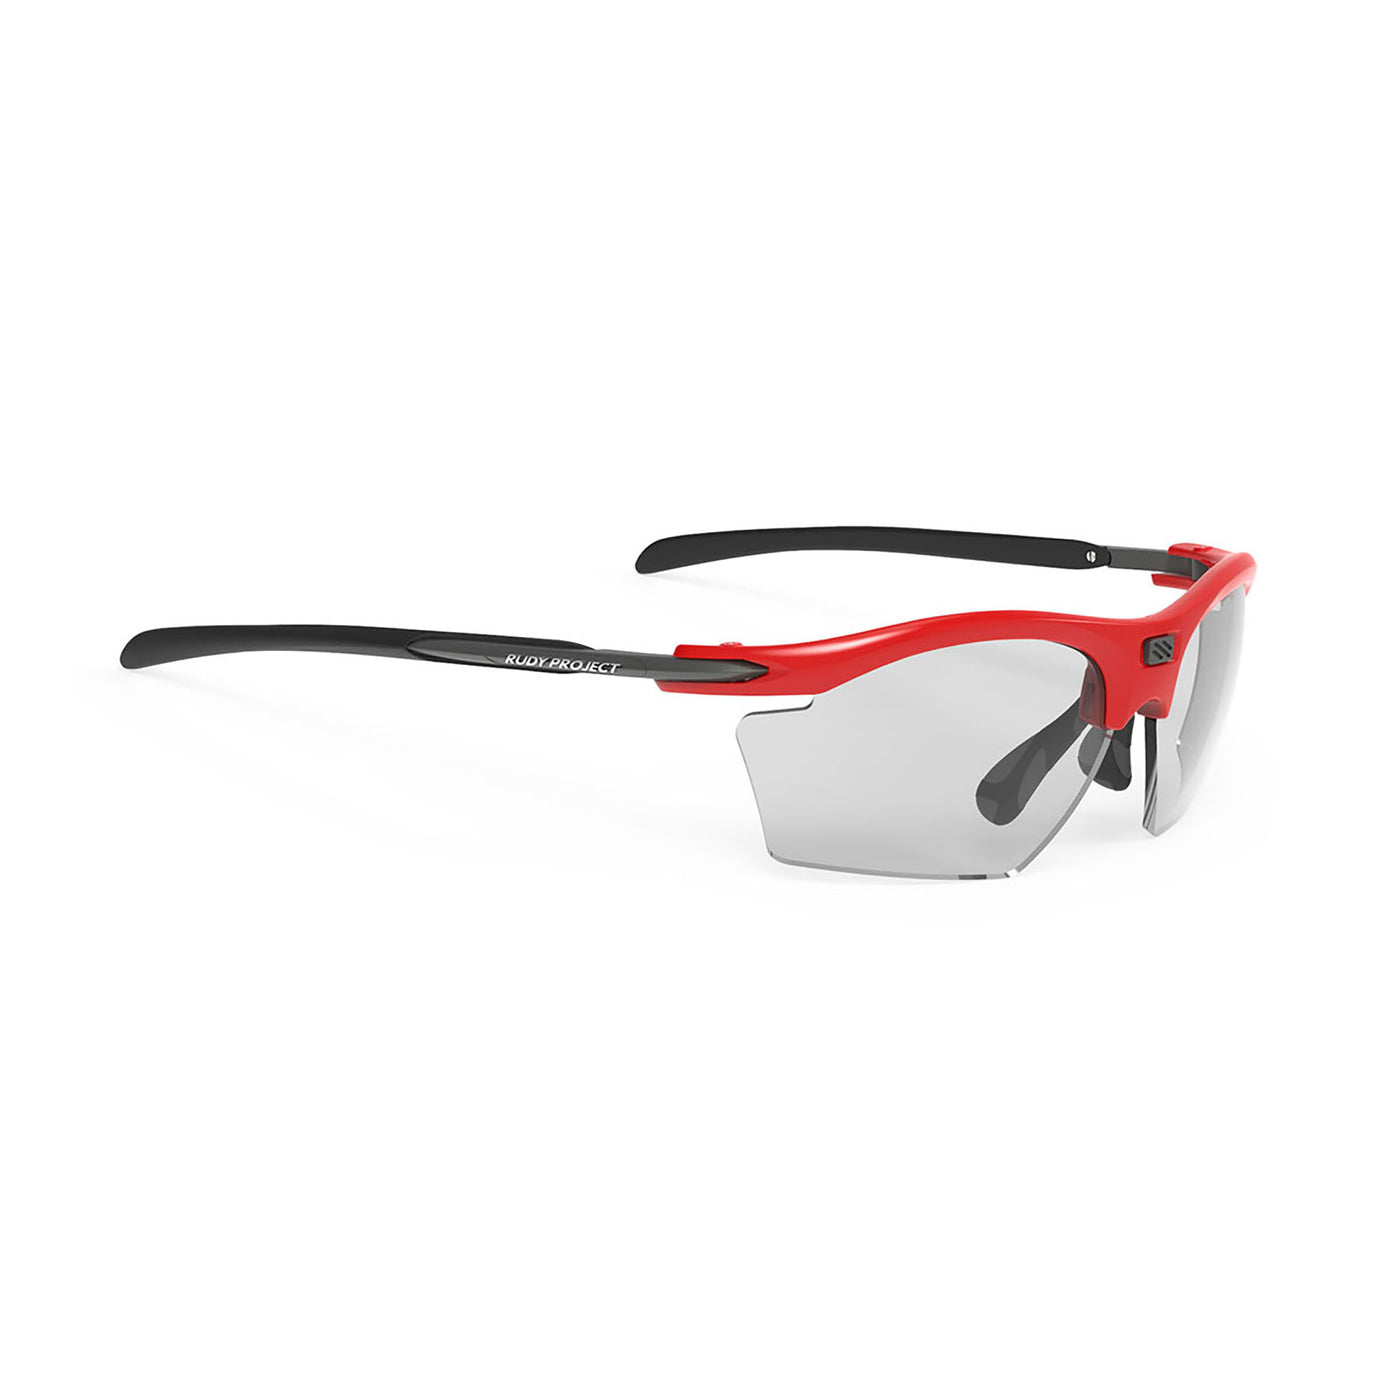 Rudy Project prescription ready womens sport sunglasses#color_rydon-slim-fire-red-gloss-frame-with-impactx-photochromic-2-black-lenses